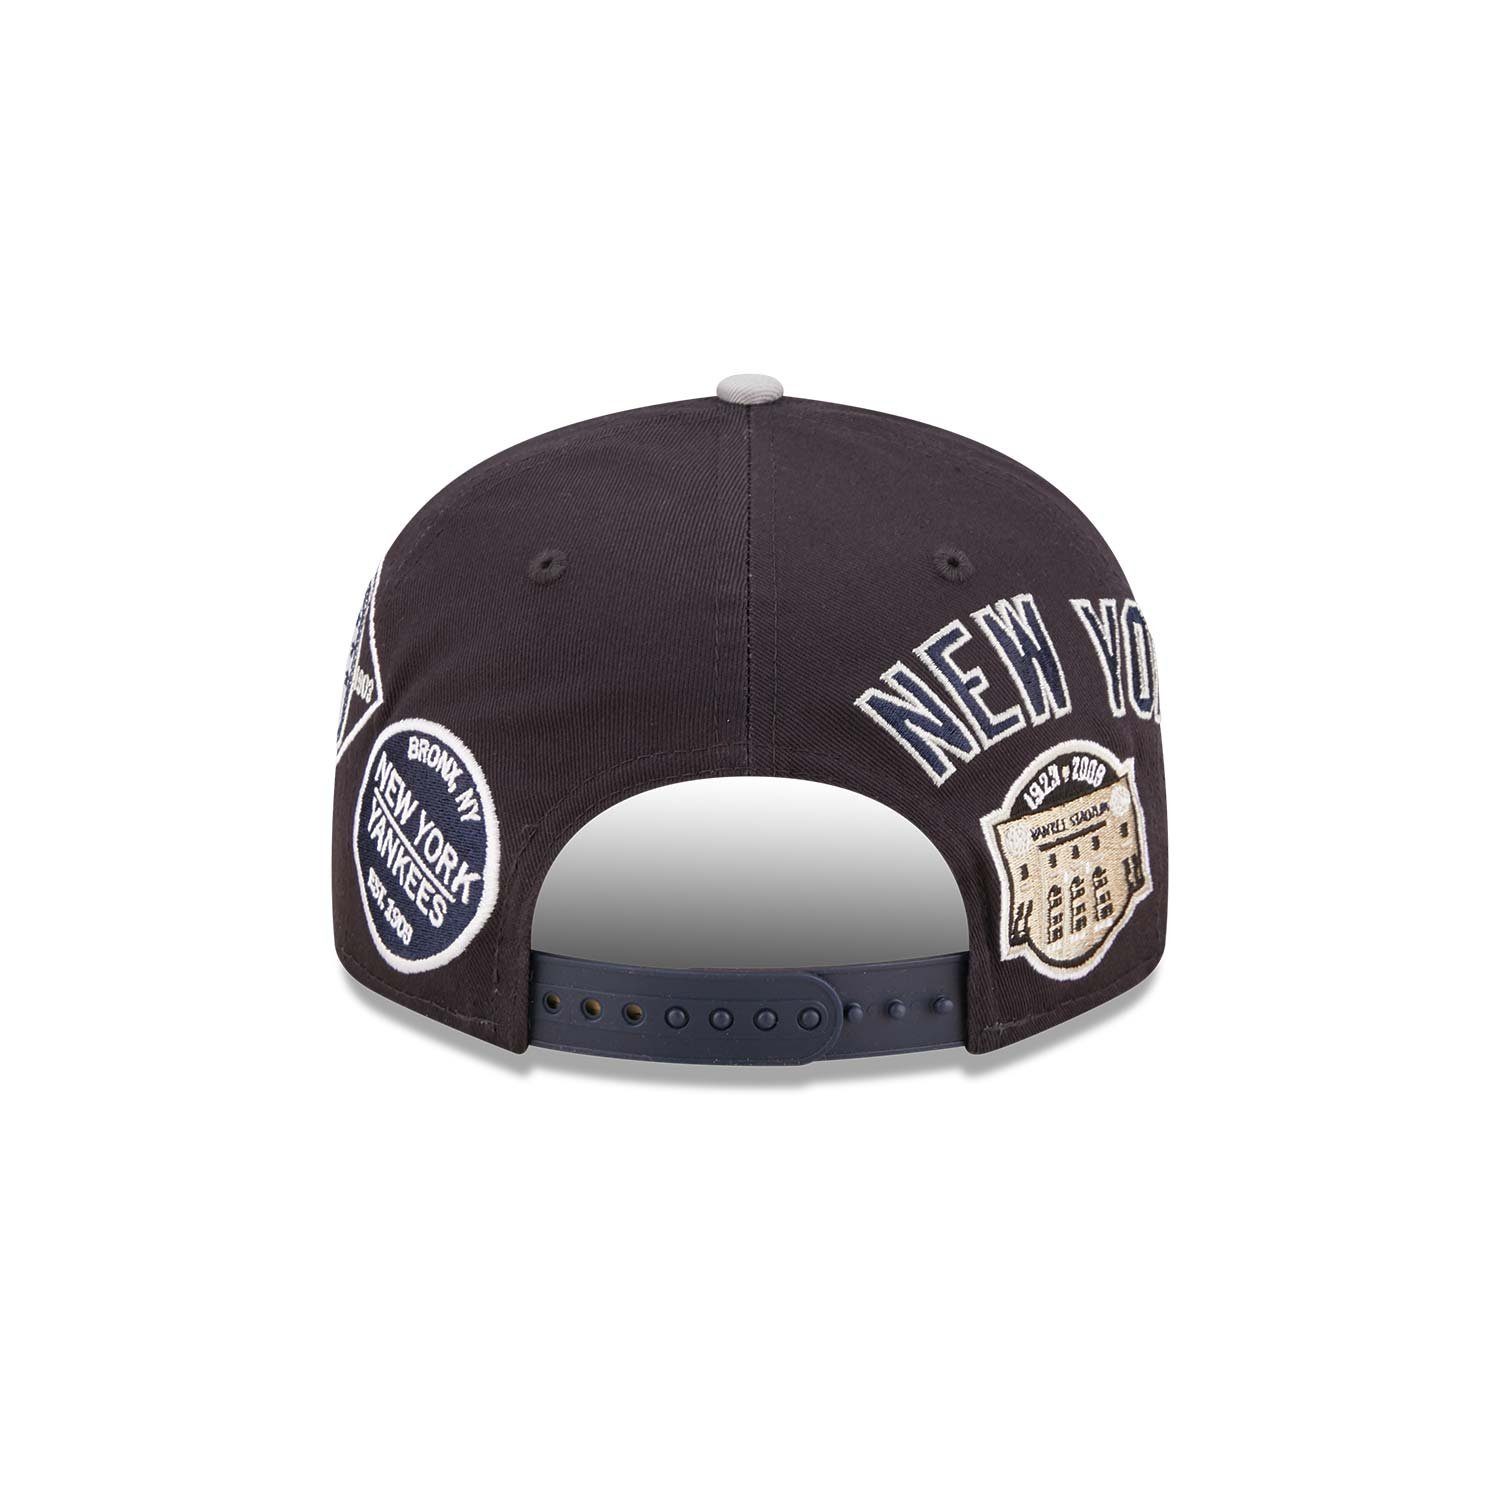 Patches York Cap All Baseball 9FIFTY Era New Yankees Over New